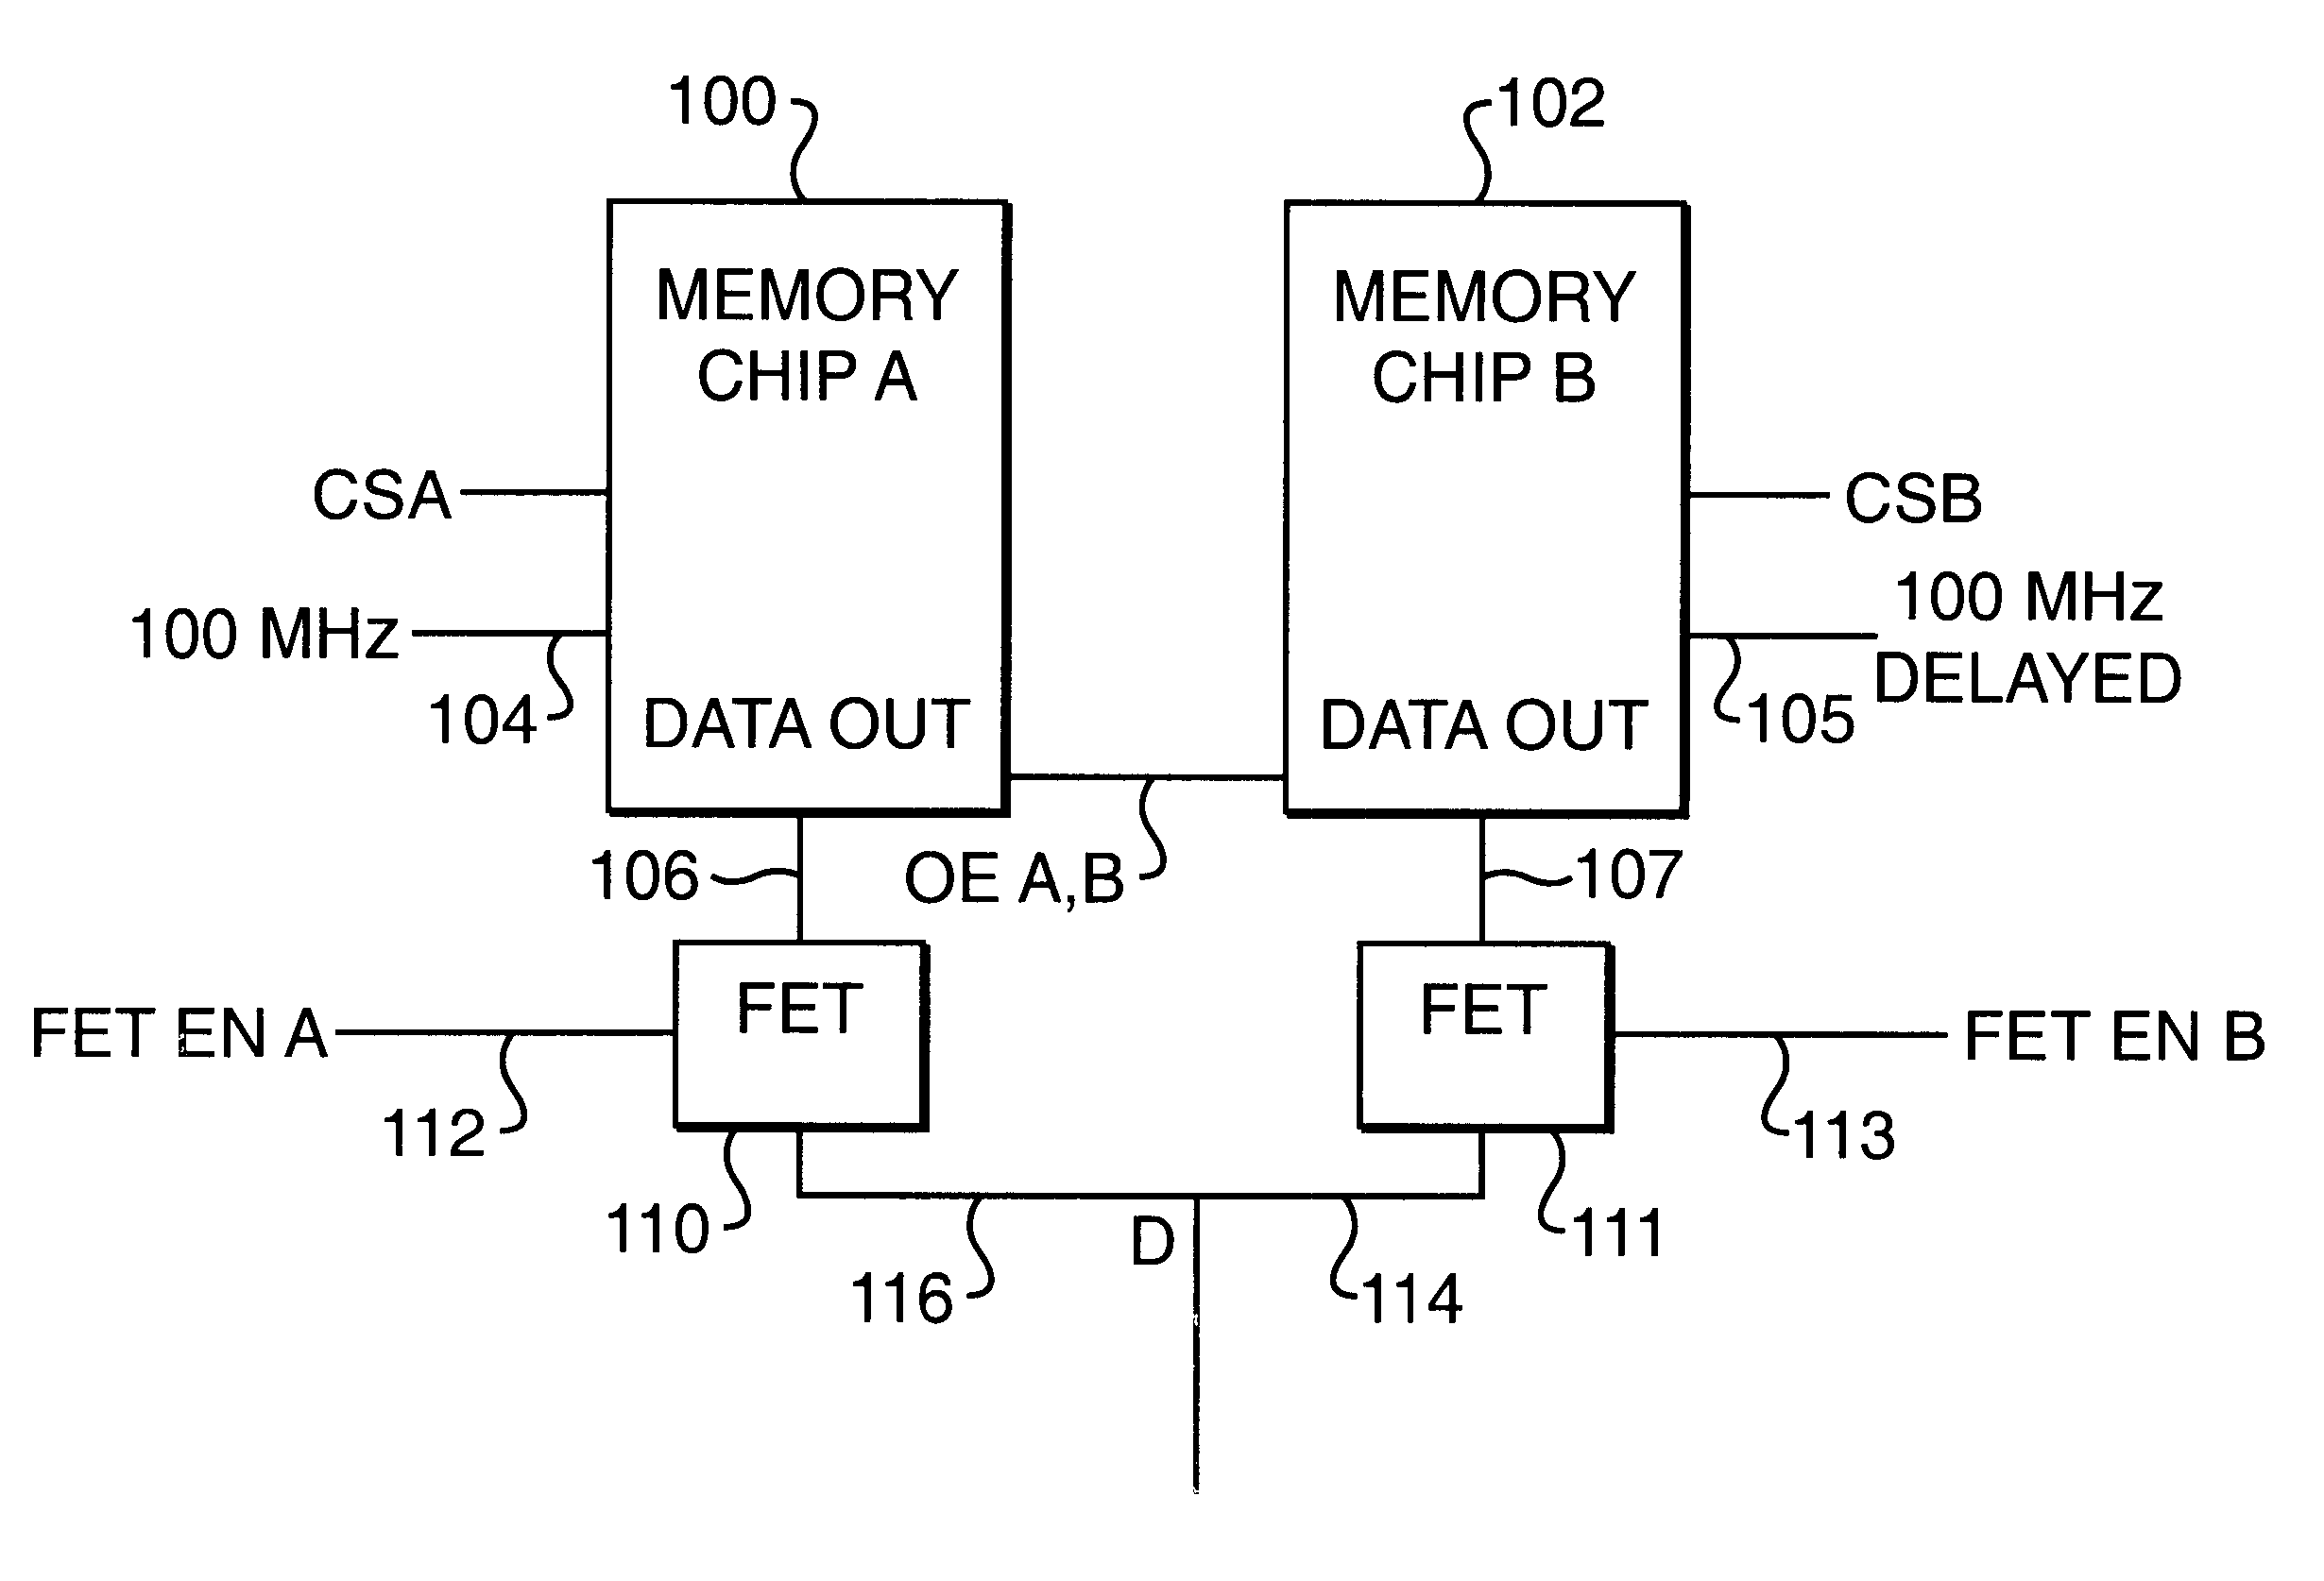 Memory system using FET switches to select memory banks